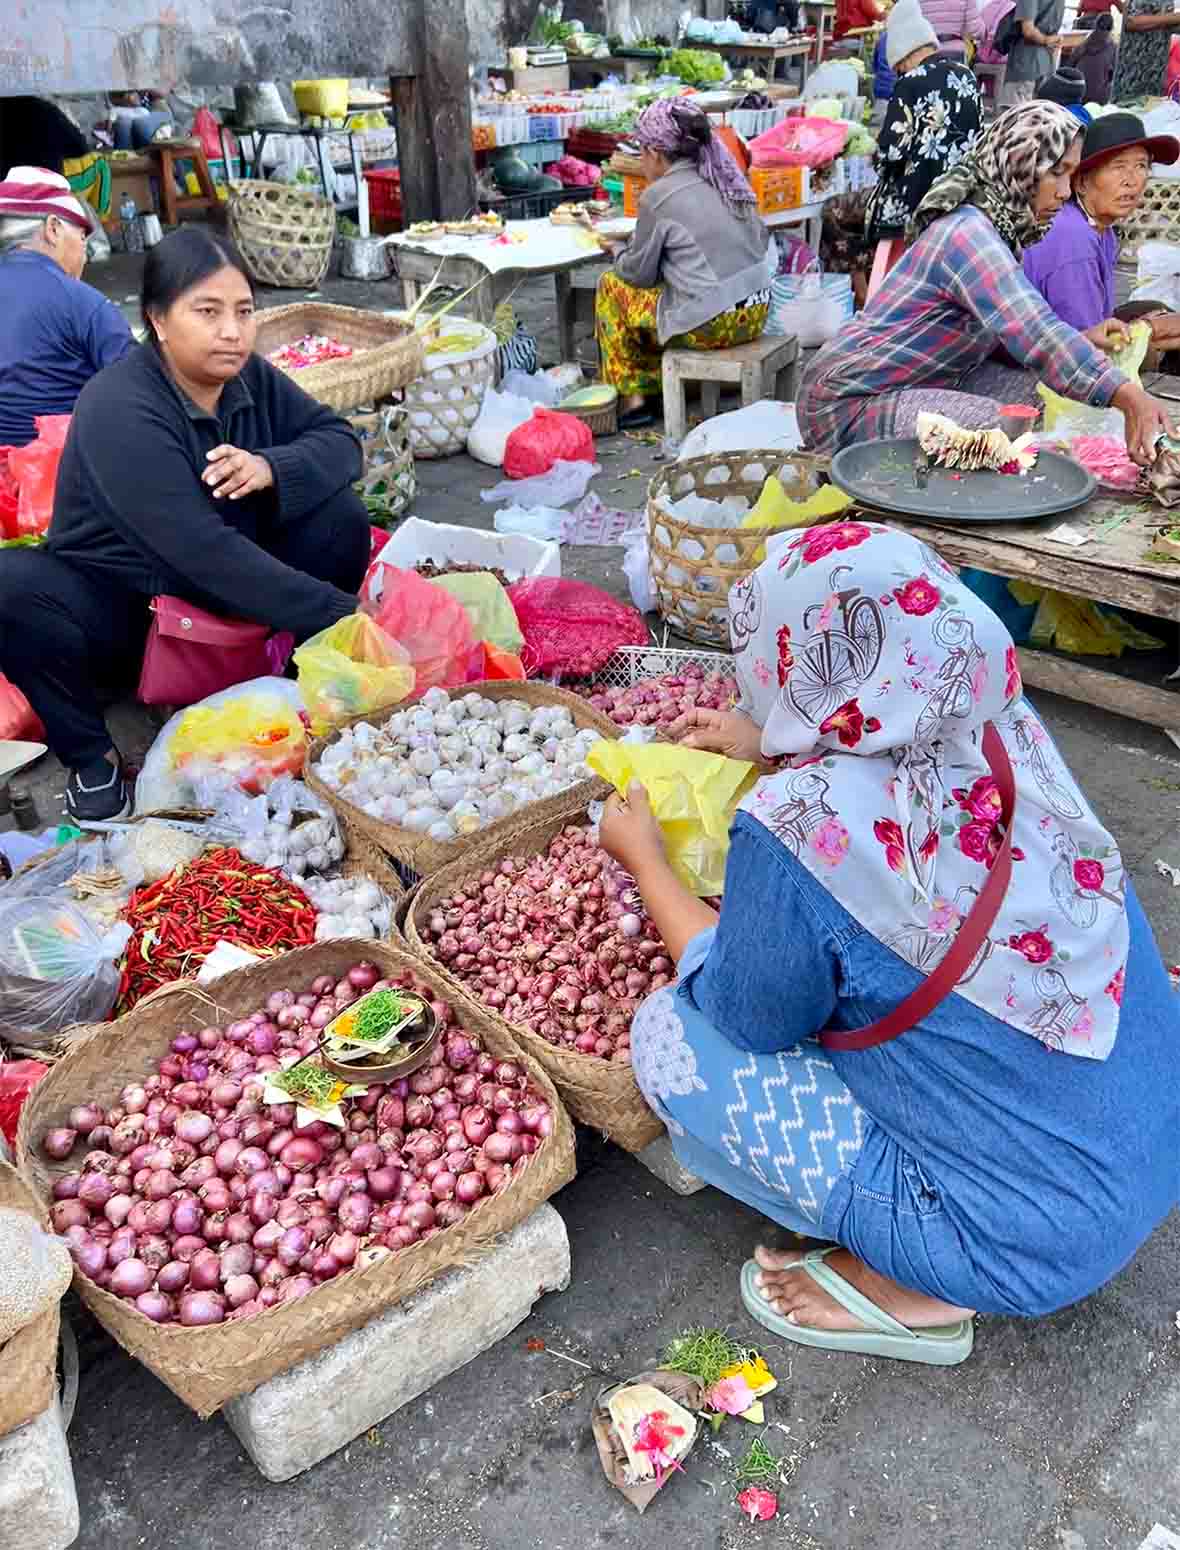 Two women in a local market in Indonesia are floor sitting.